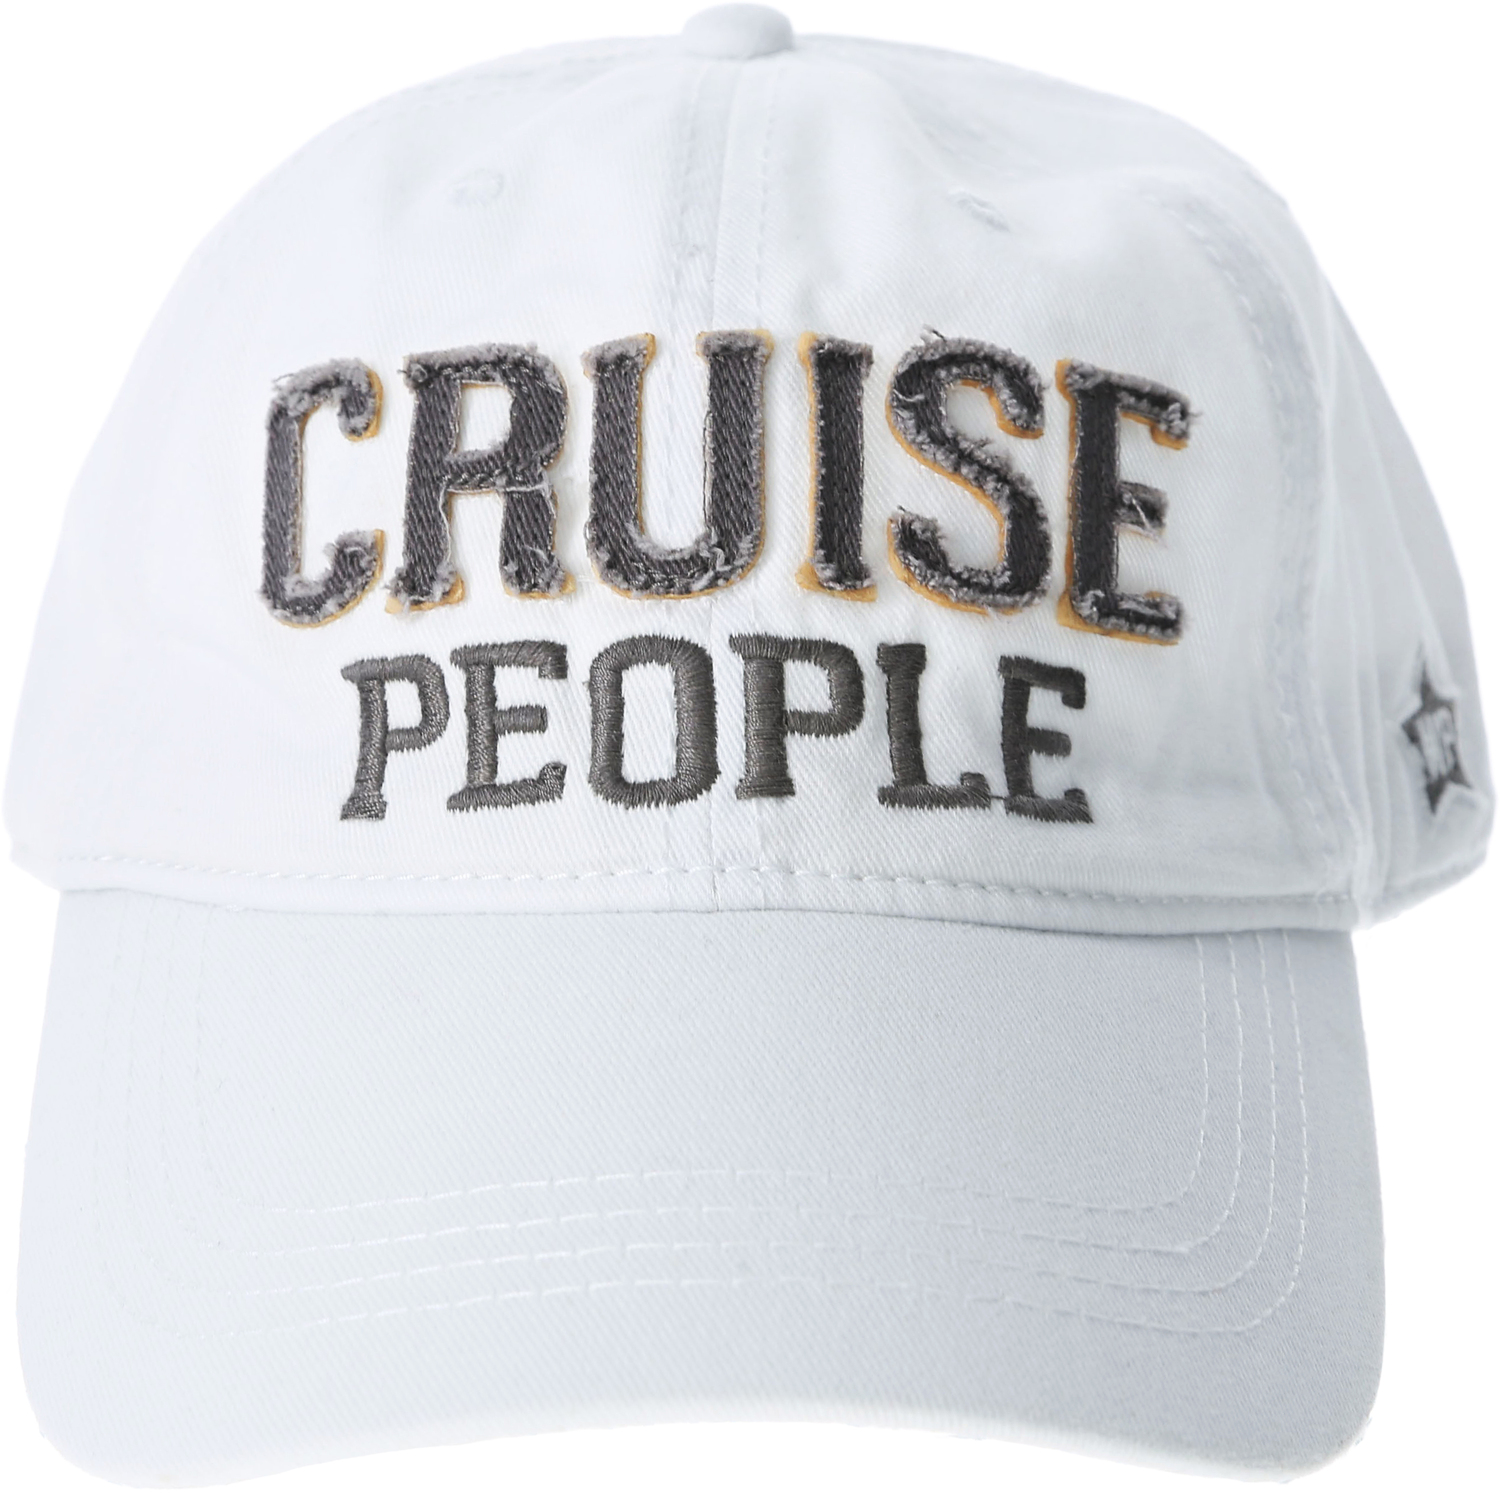 Cruise People by We People - Cruise People - White Adjustable Hat